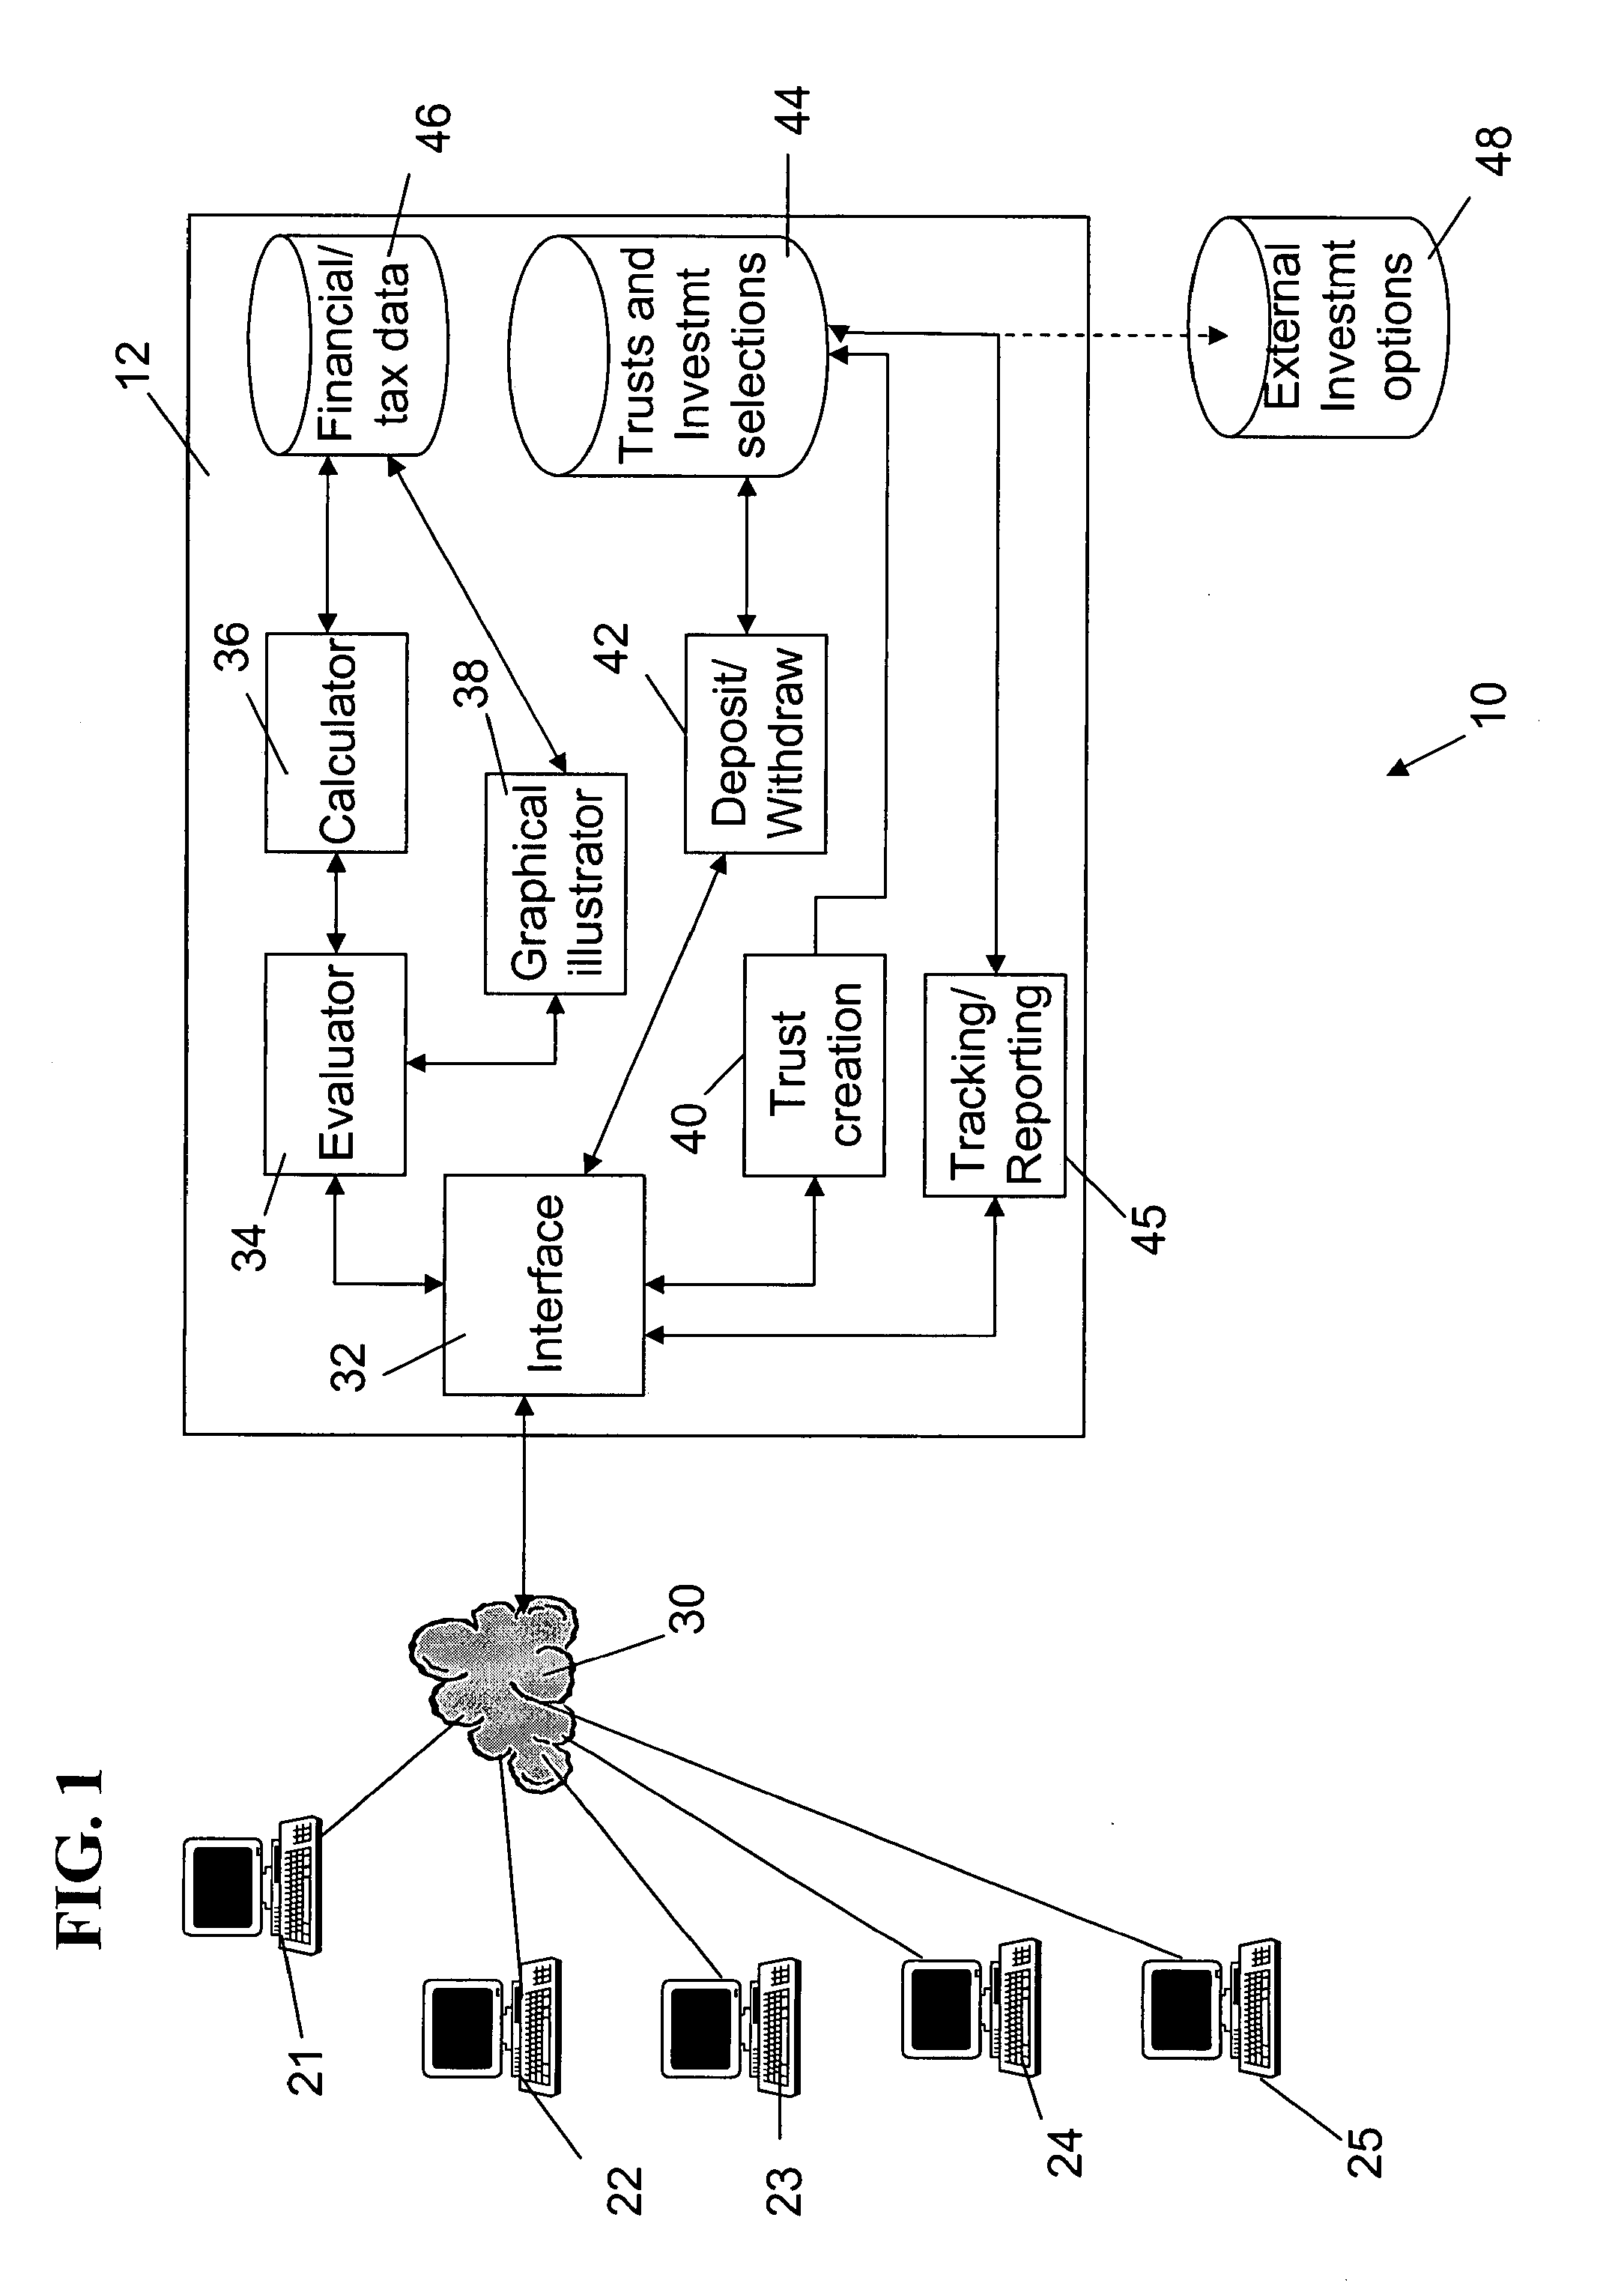 System and Method for Facilitating the Funding and Administration of a Long Term Investment or Retirement Trust